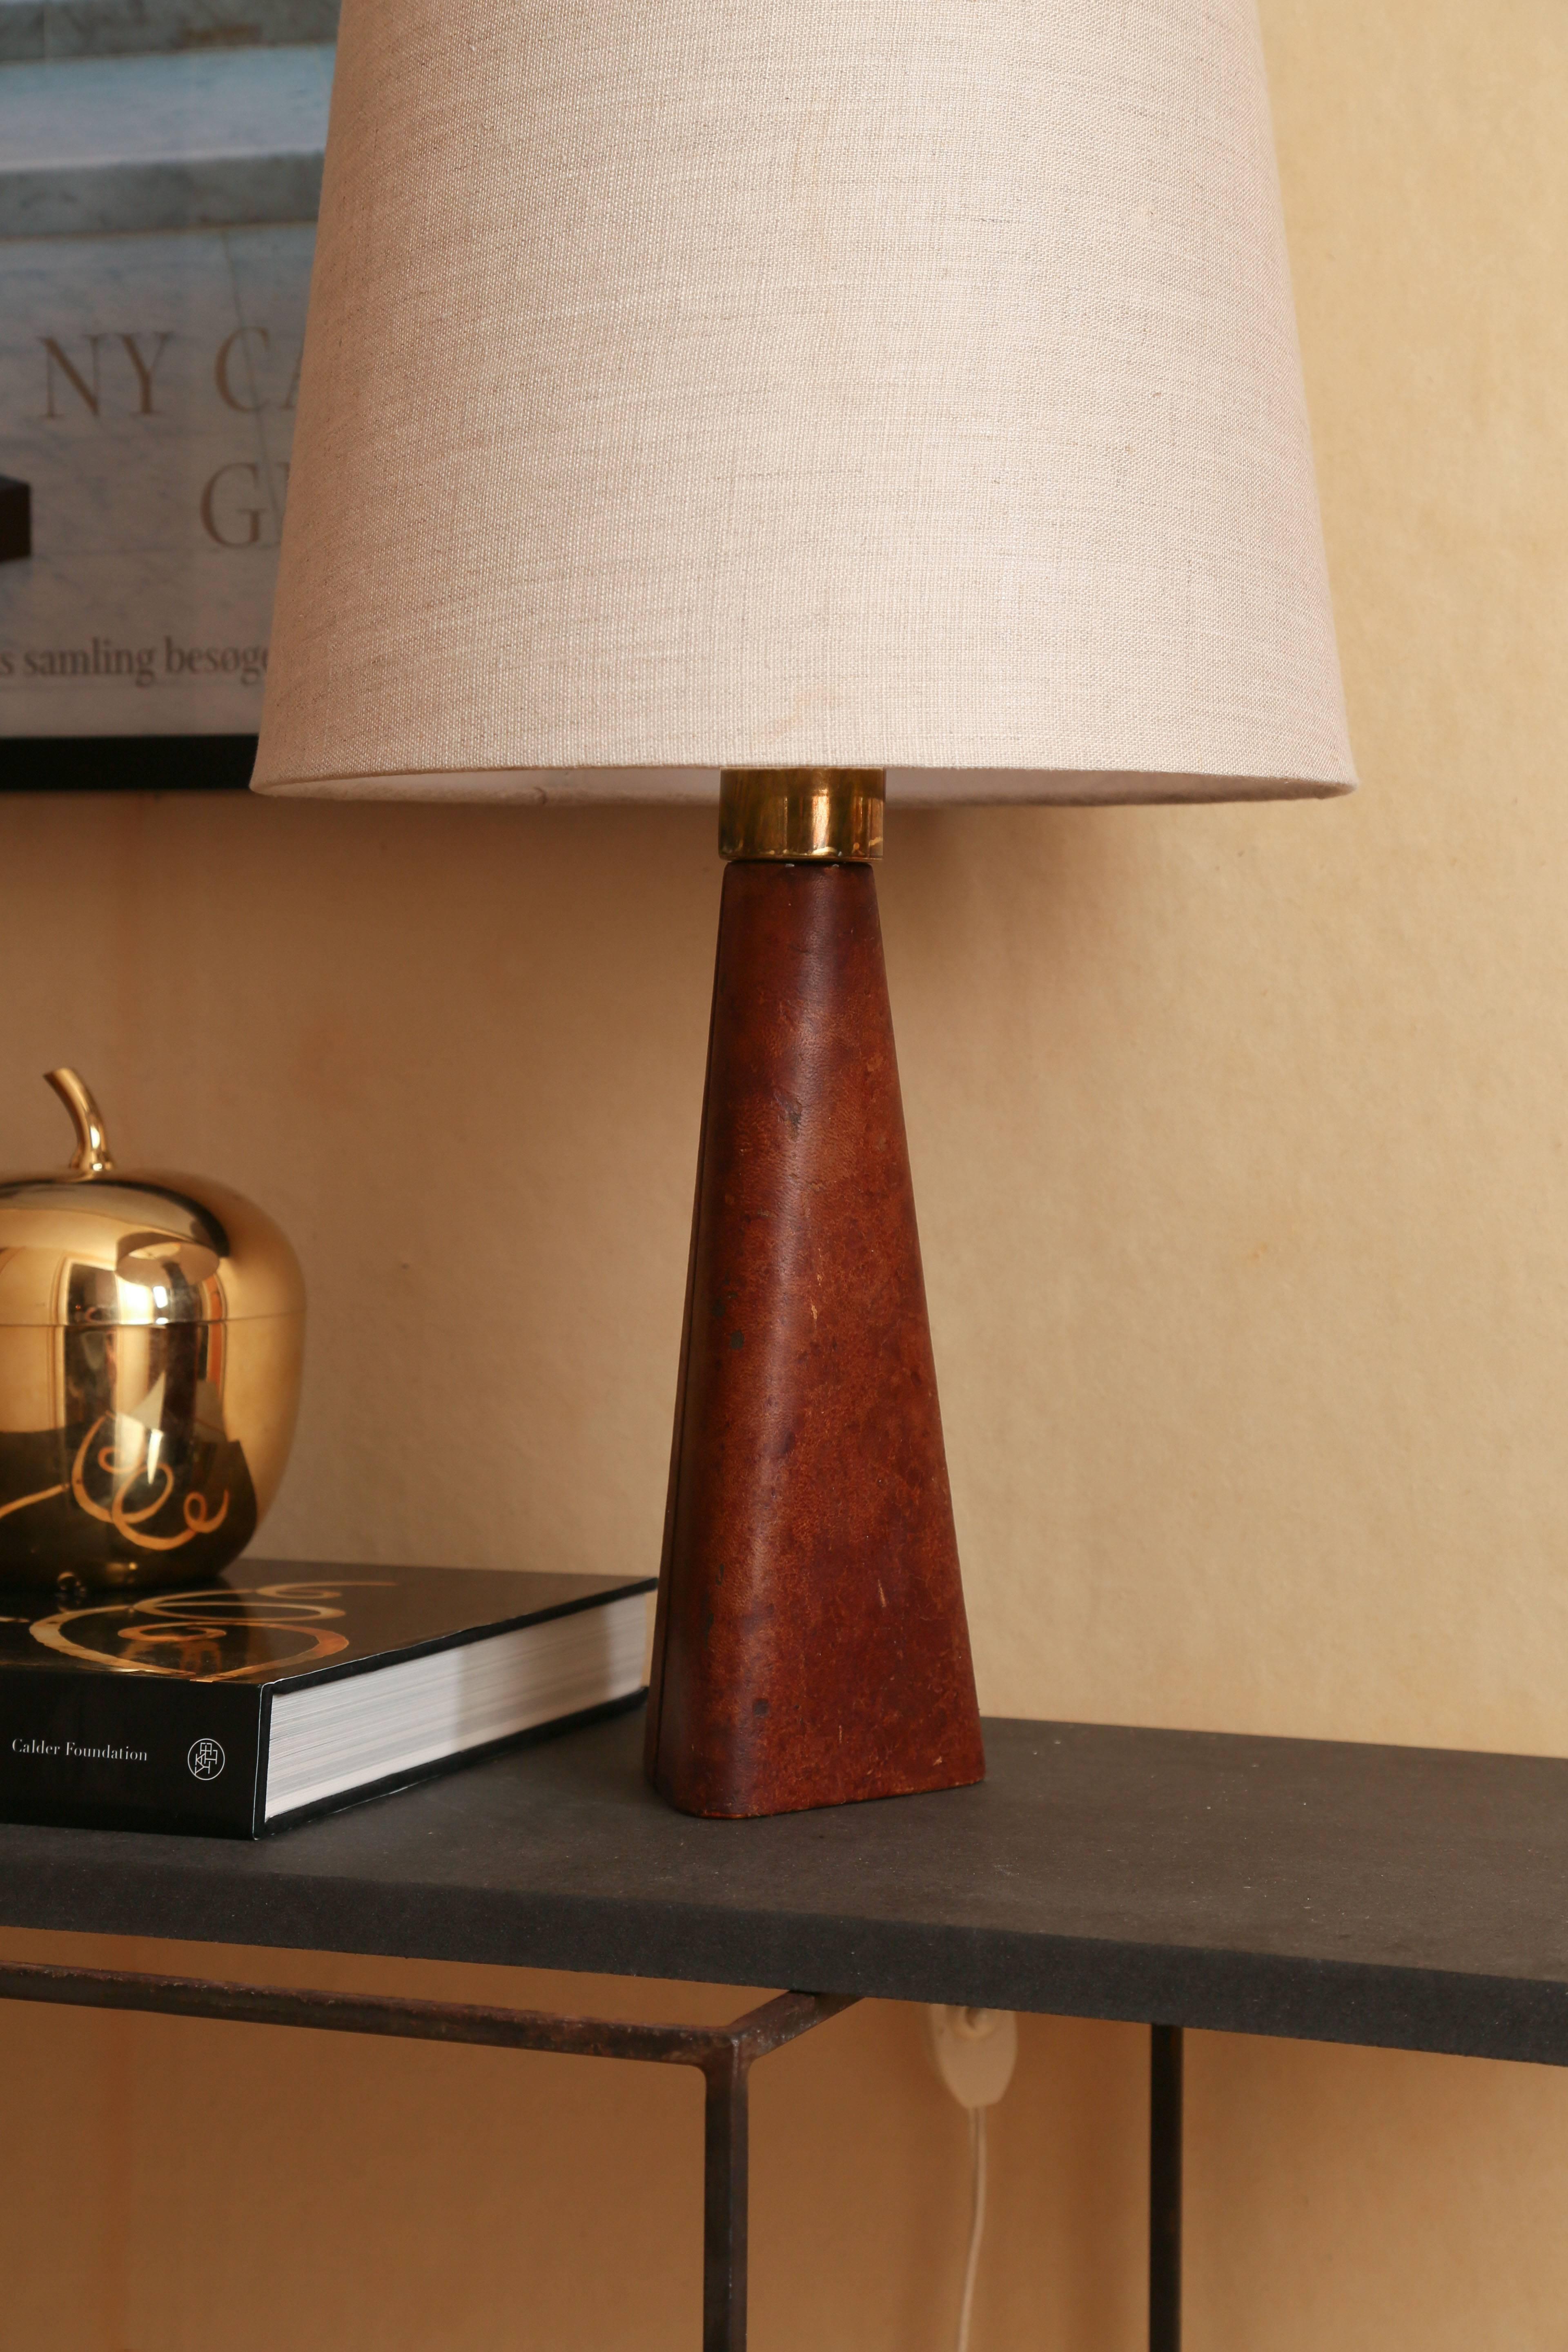 Triangle shaped table lamp by Lisa Johansson-Pape, model No.46-186.

Manufactured by Stockmann-Orno Oy

Finland, circa 1950s

Brown leather covered base with brass fittings.

Manufacturer's mark ST underside

Newly upholstered linen shade.